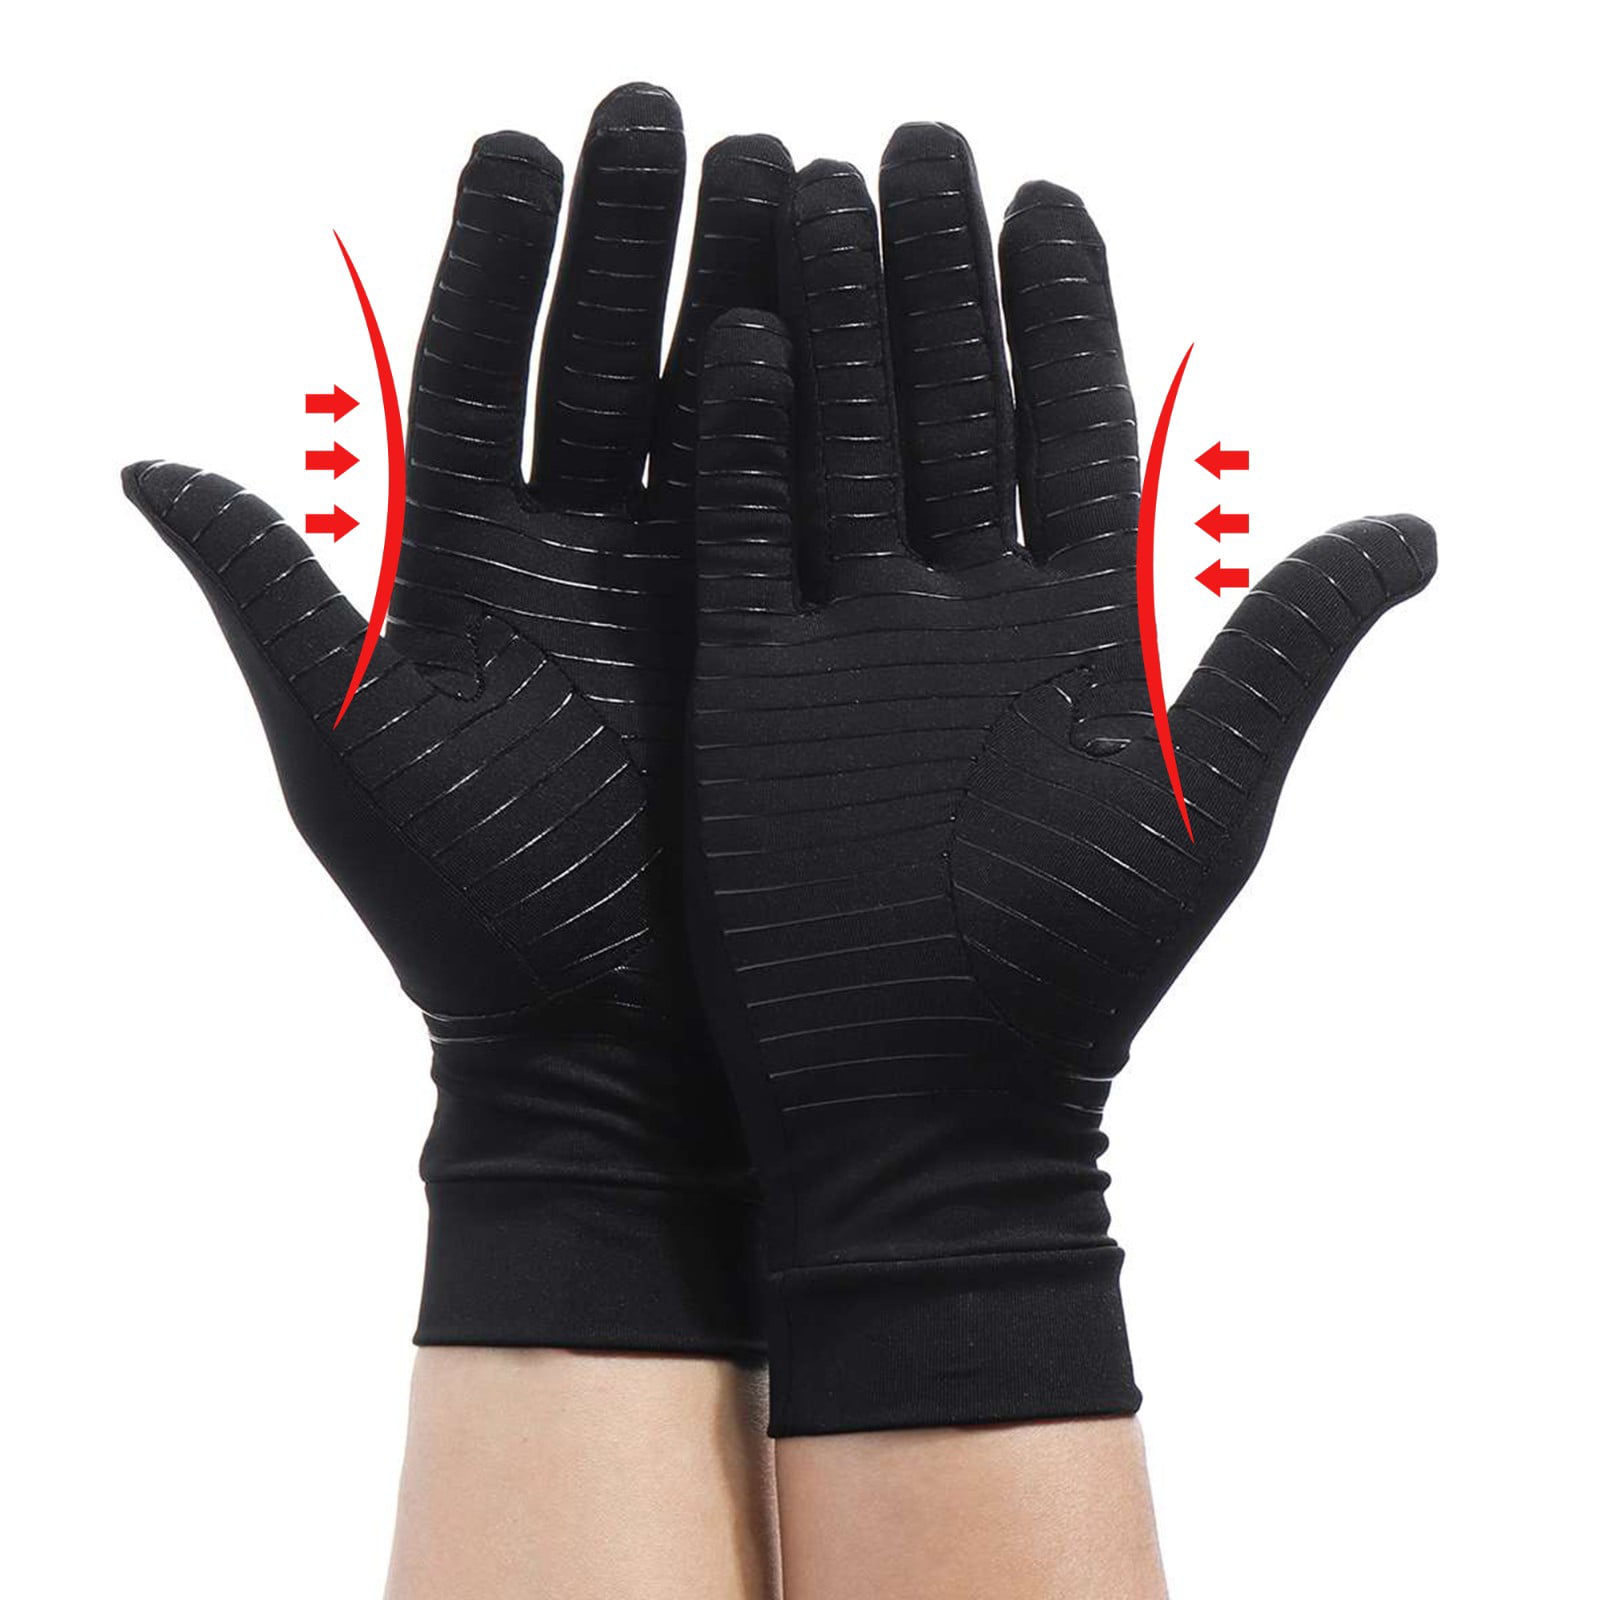 compression gloves for arthritis in hands